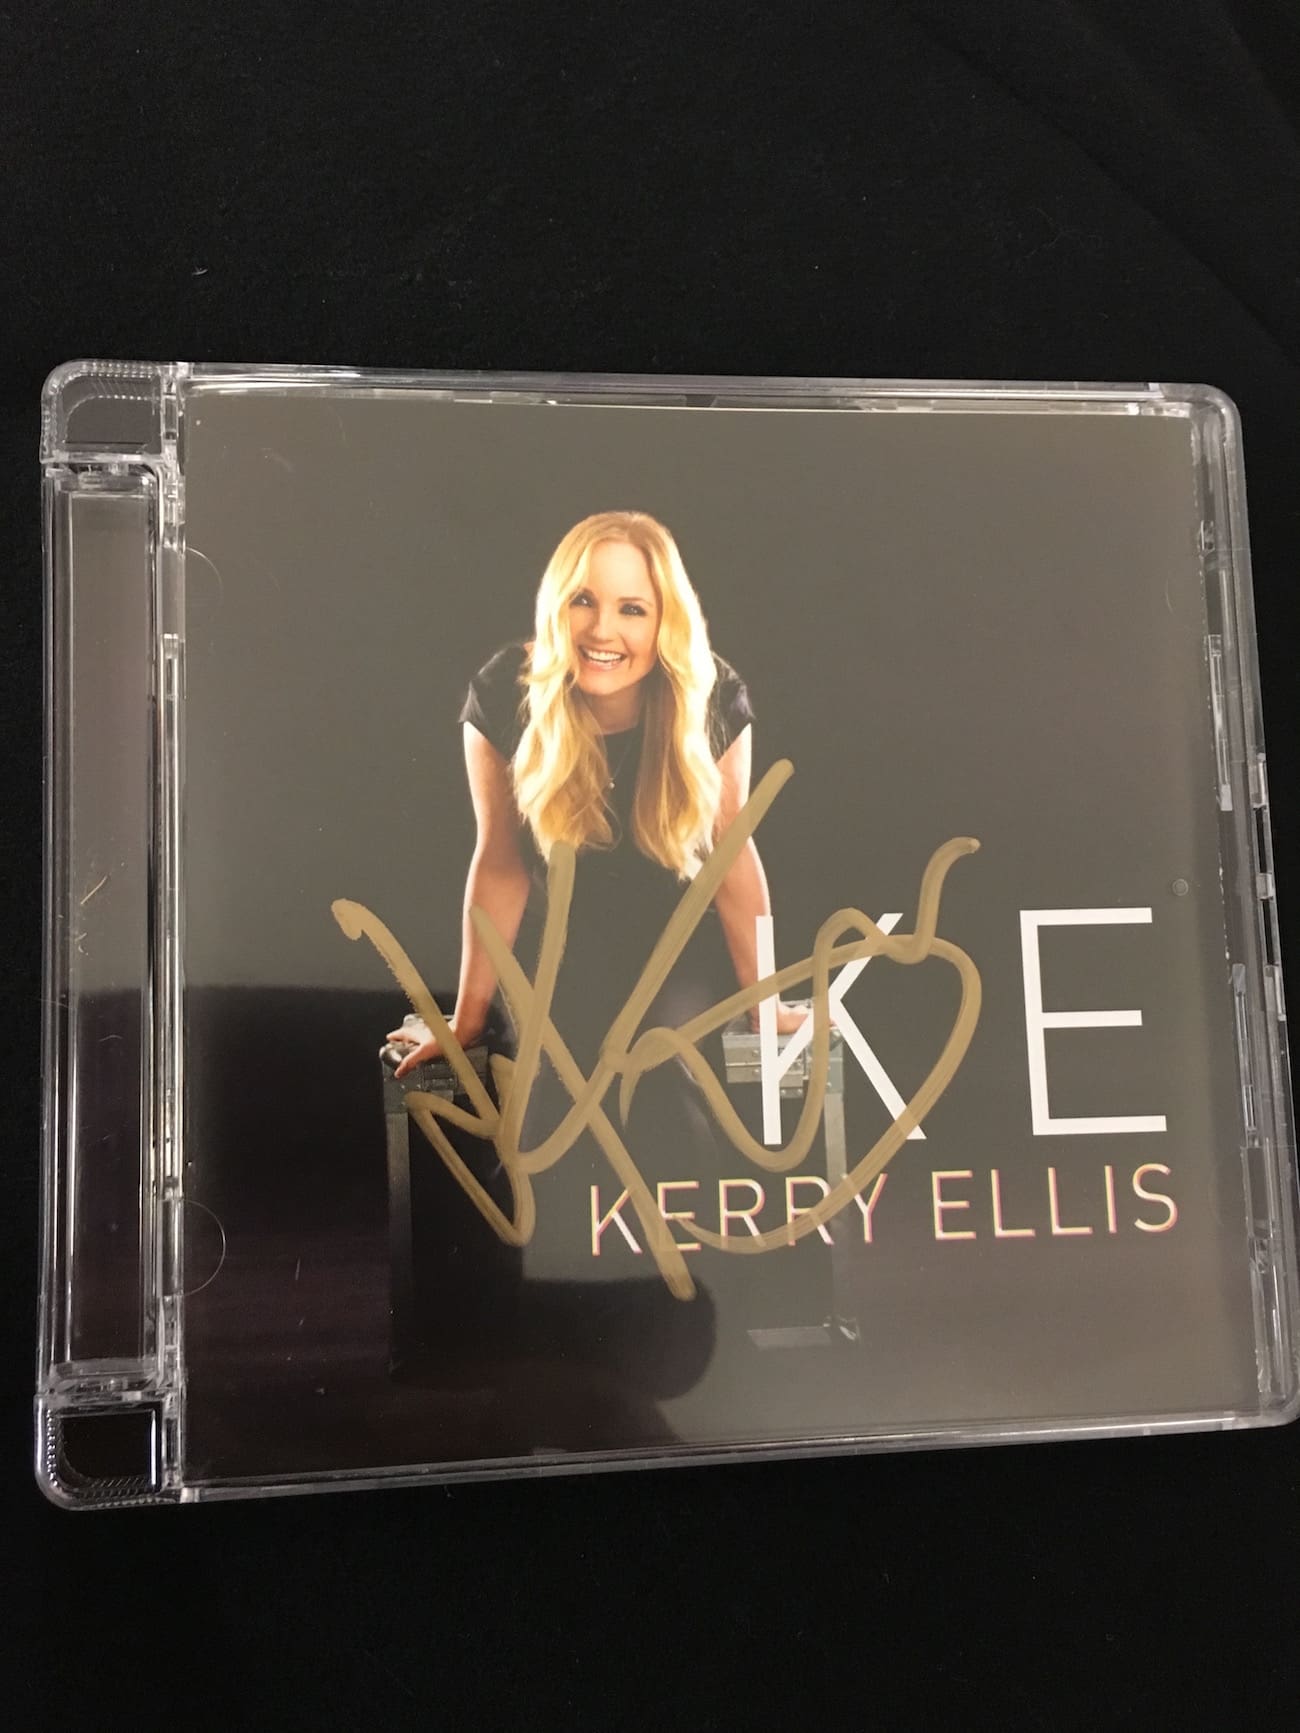 Featured image for “Enter our competition for a chance to win a signed Kerry Ellis KE CD”